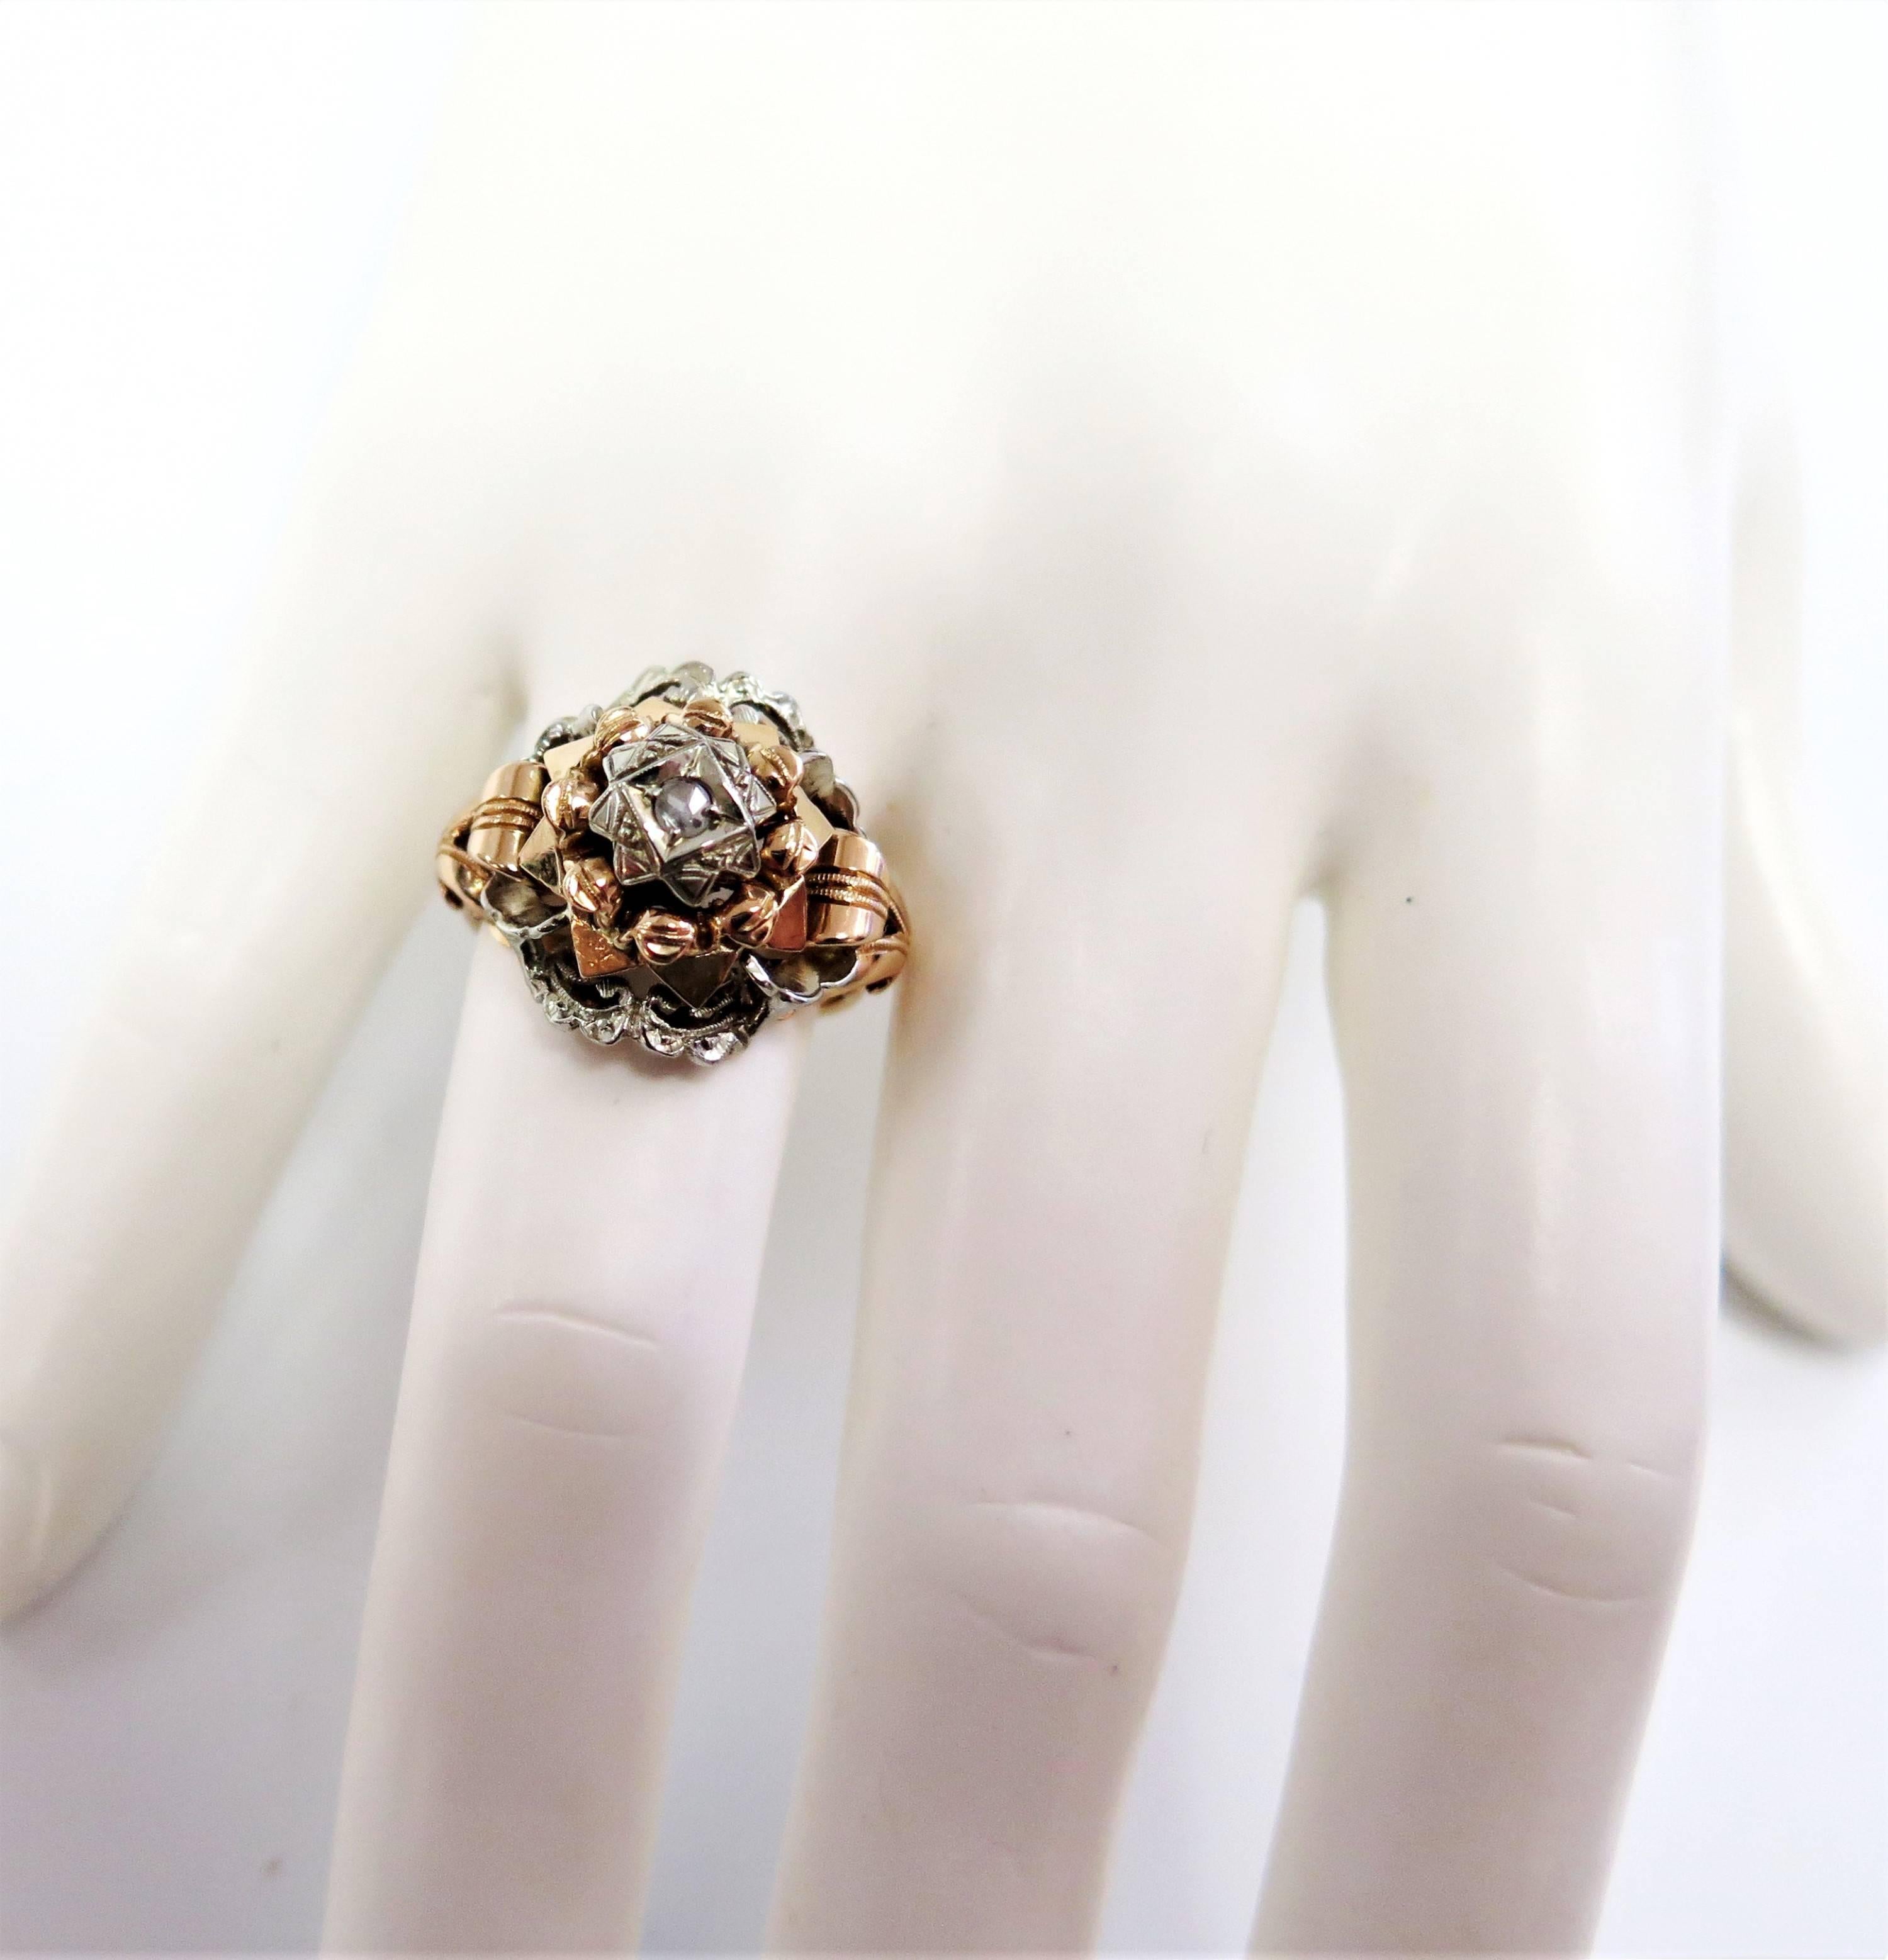 1920s White and Rose Gold Ring with Centre Rose Cut Diamond / 18 karat 1